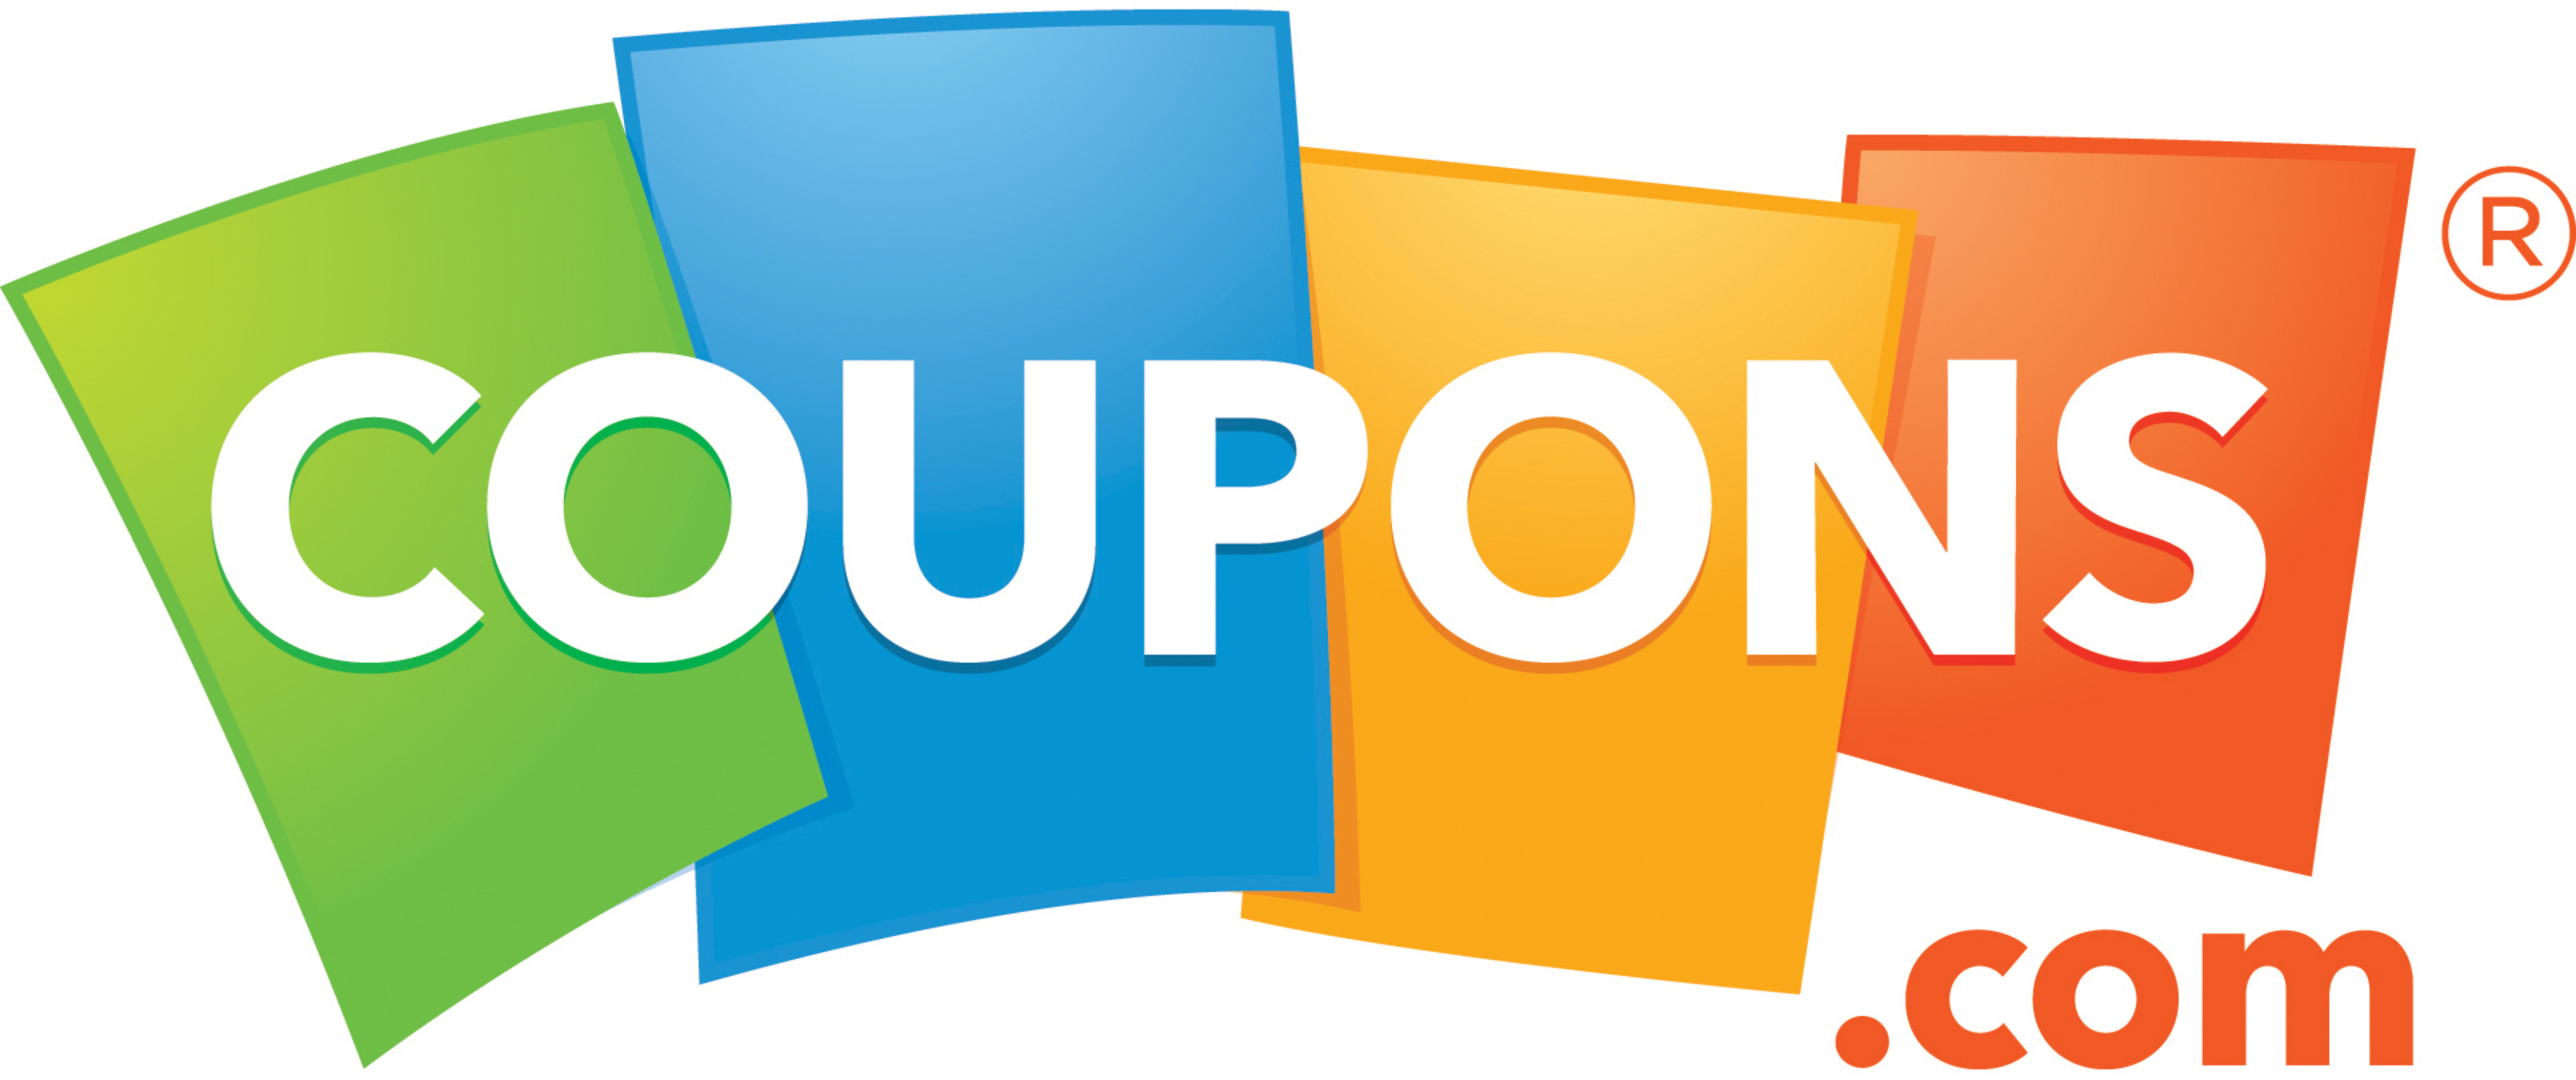 Coupons.com Incorporated operates a leading digital promotion platform that connects great brands and retailers with consumers. (PRNewsFoto/Coupons.com Incorporated) (PRNewsFoto/COUPONS.COM INCORPORATED)